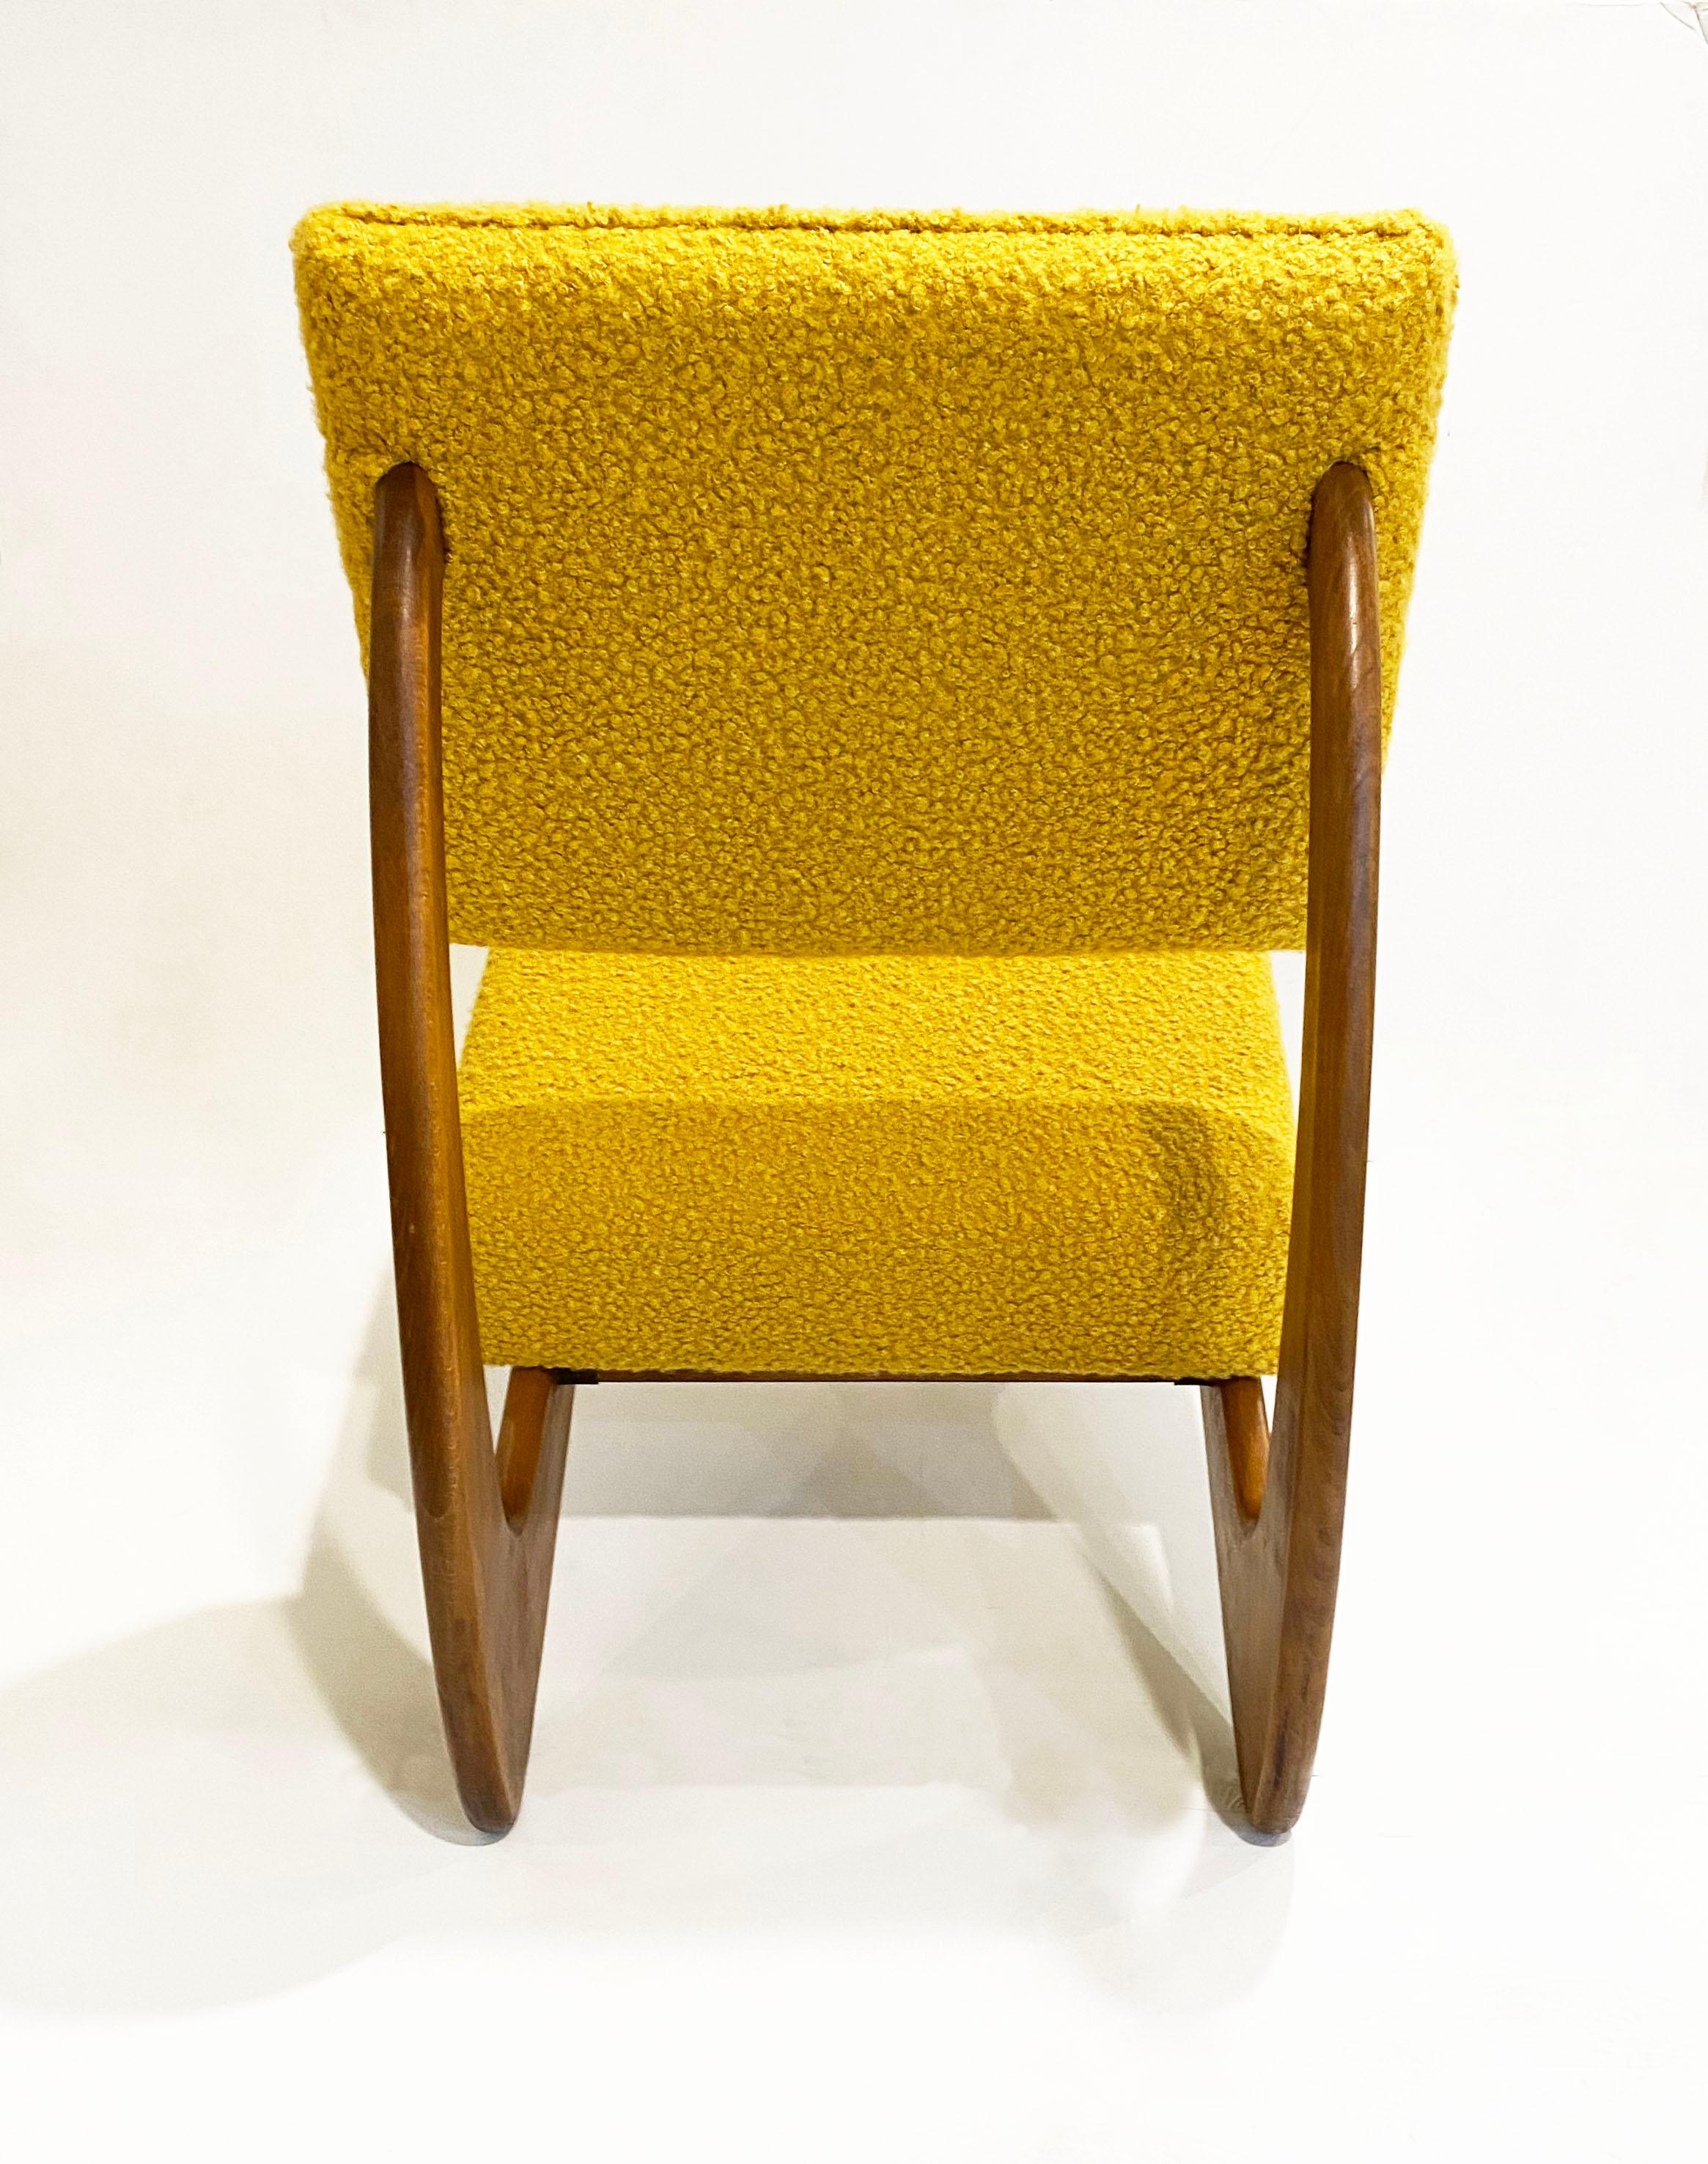 Bespoke Italian Pair of Boucle Mustard Yellow Aero Curved Beech Lounge Chairs In New Condition For Sale In New York, NY